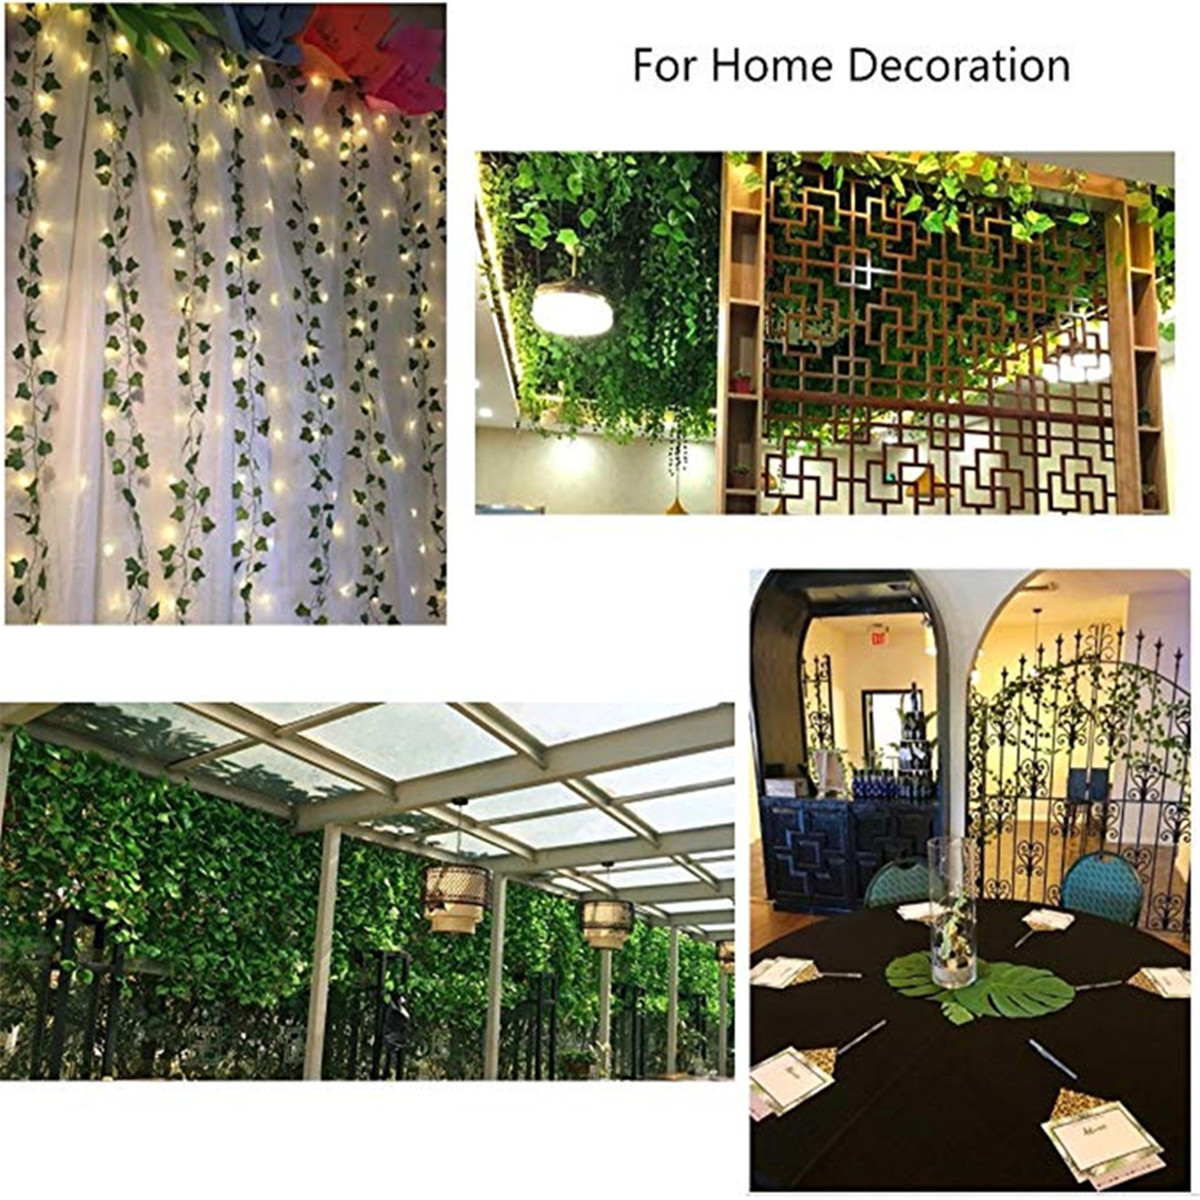 12pcs-Artificial-Greenery-Vine-Ivy-Leaves-Garland-Hanging-Wedding-Party-Garden-Decorations-1679234-1